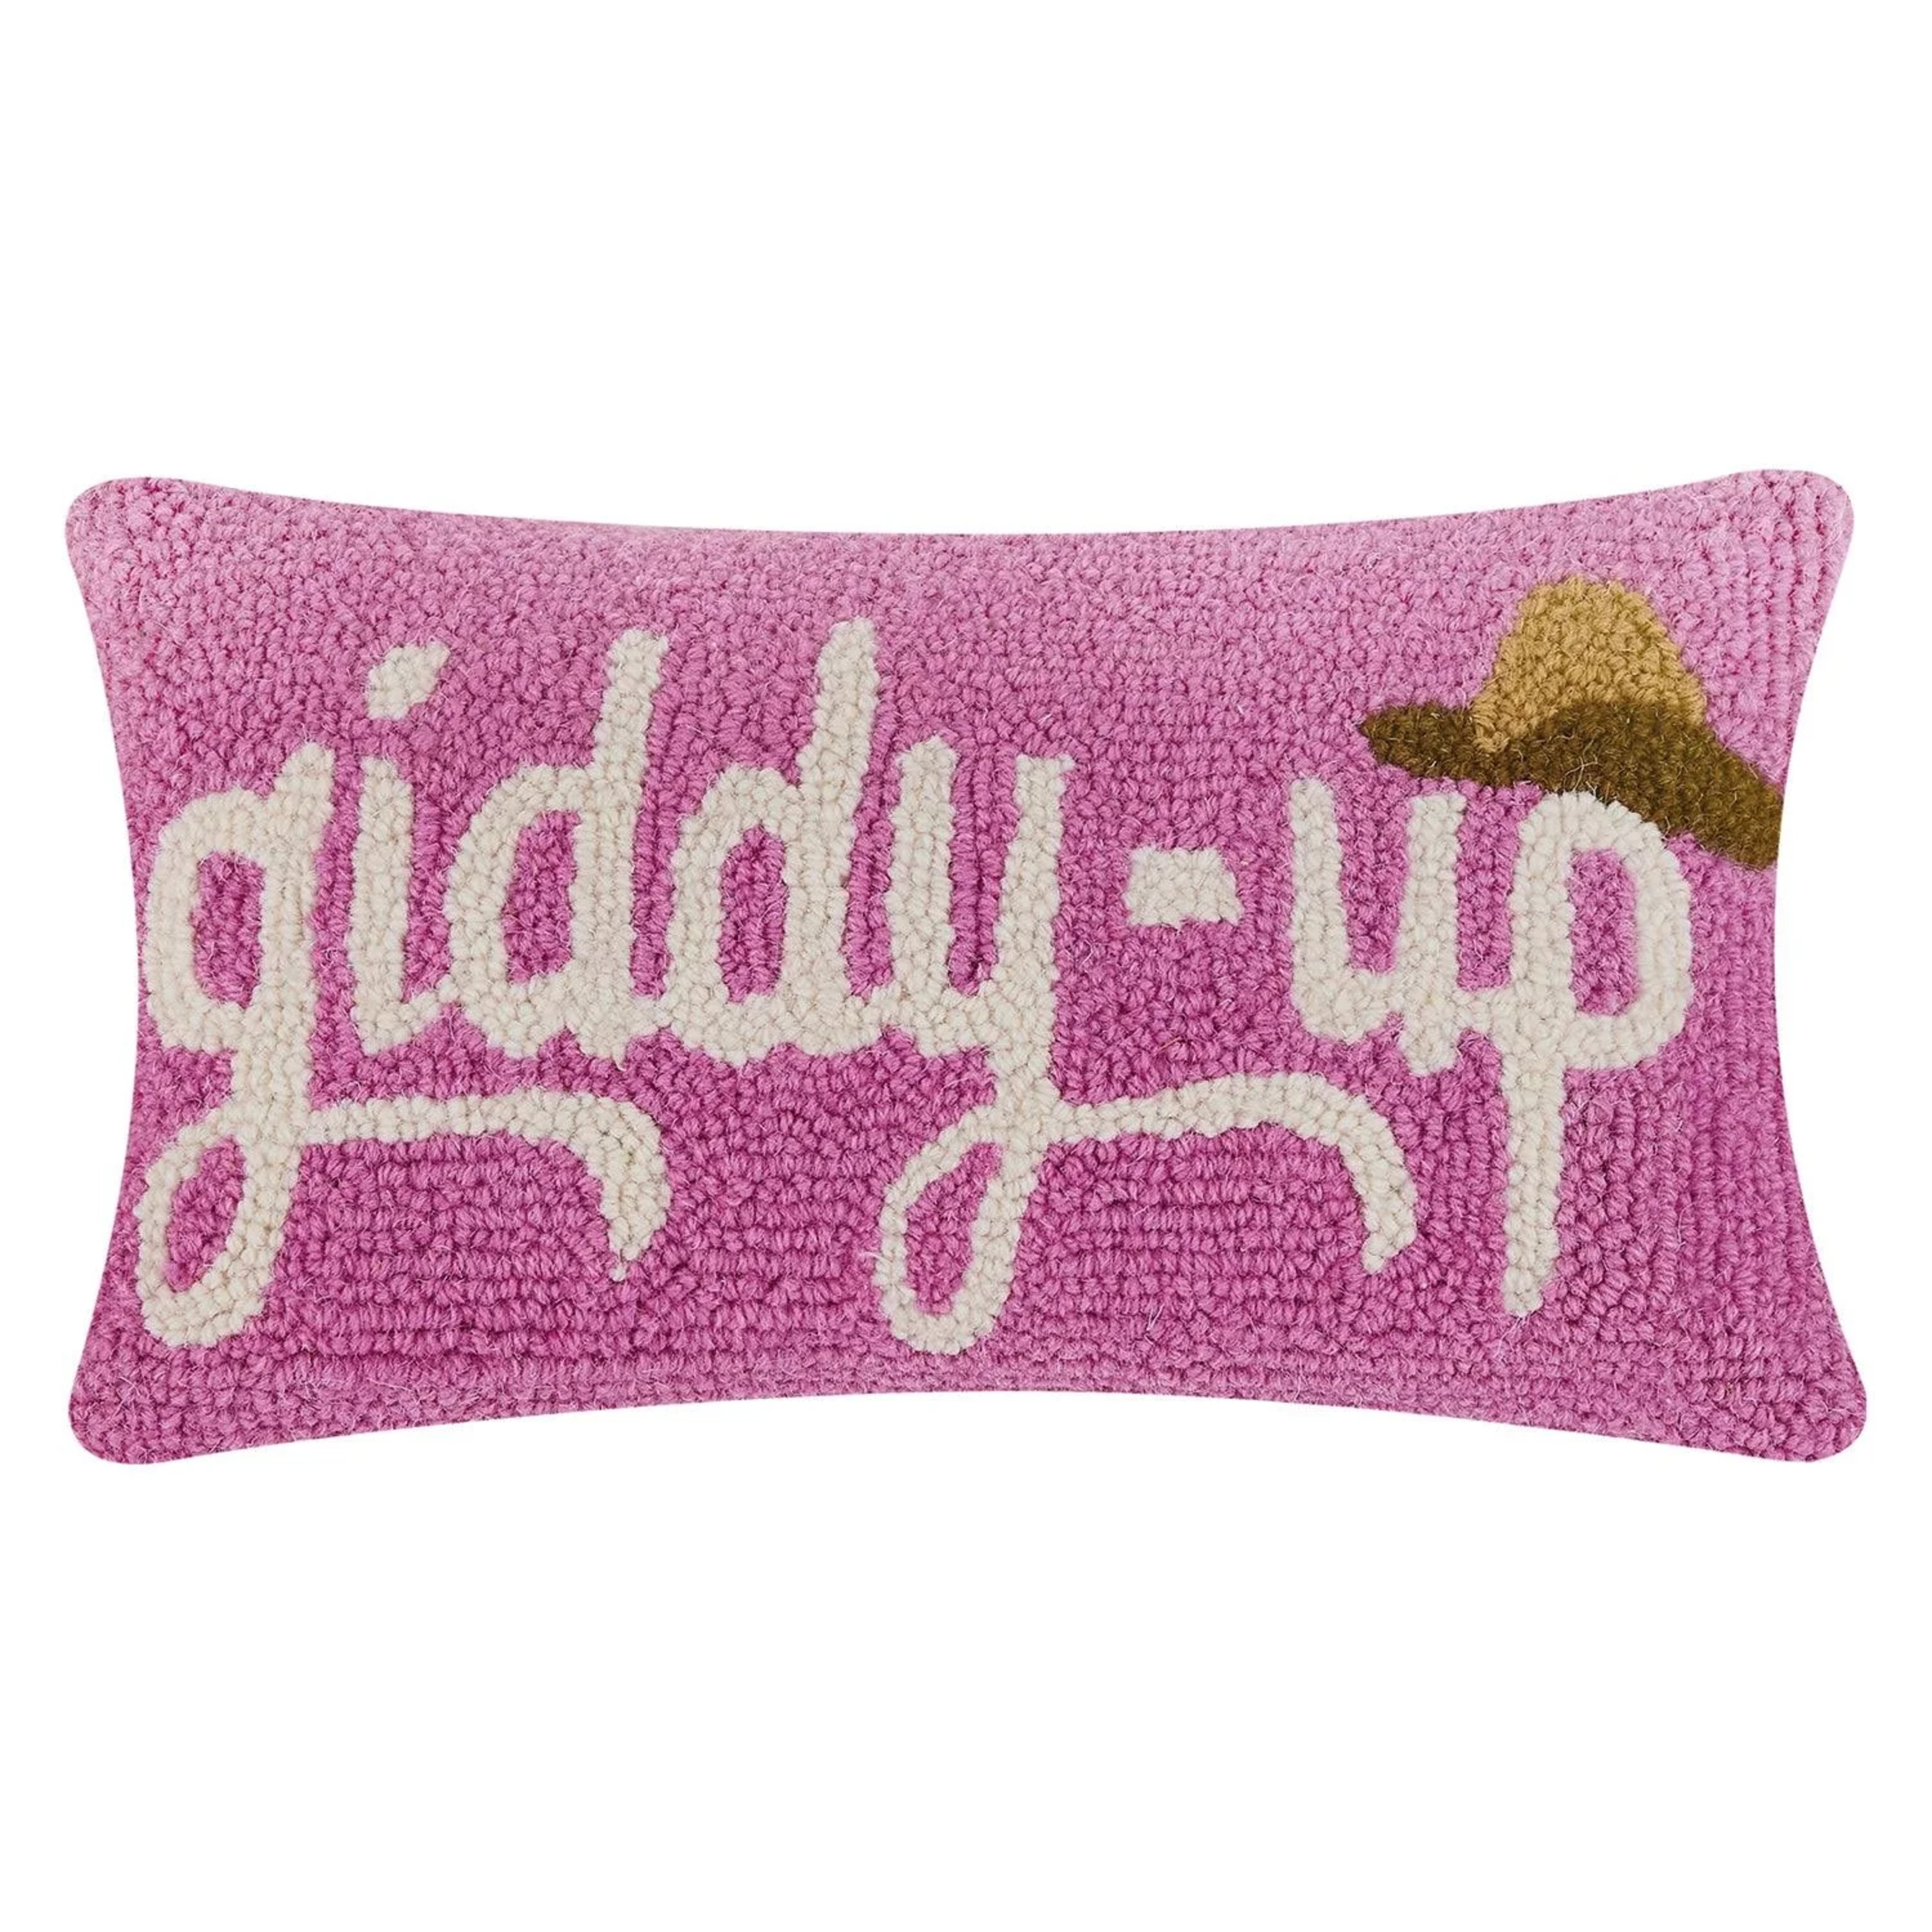 Giddy Up Hat Hooked Pillow